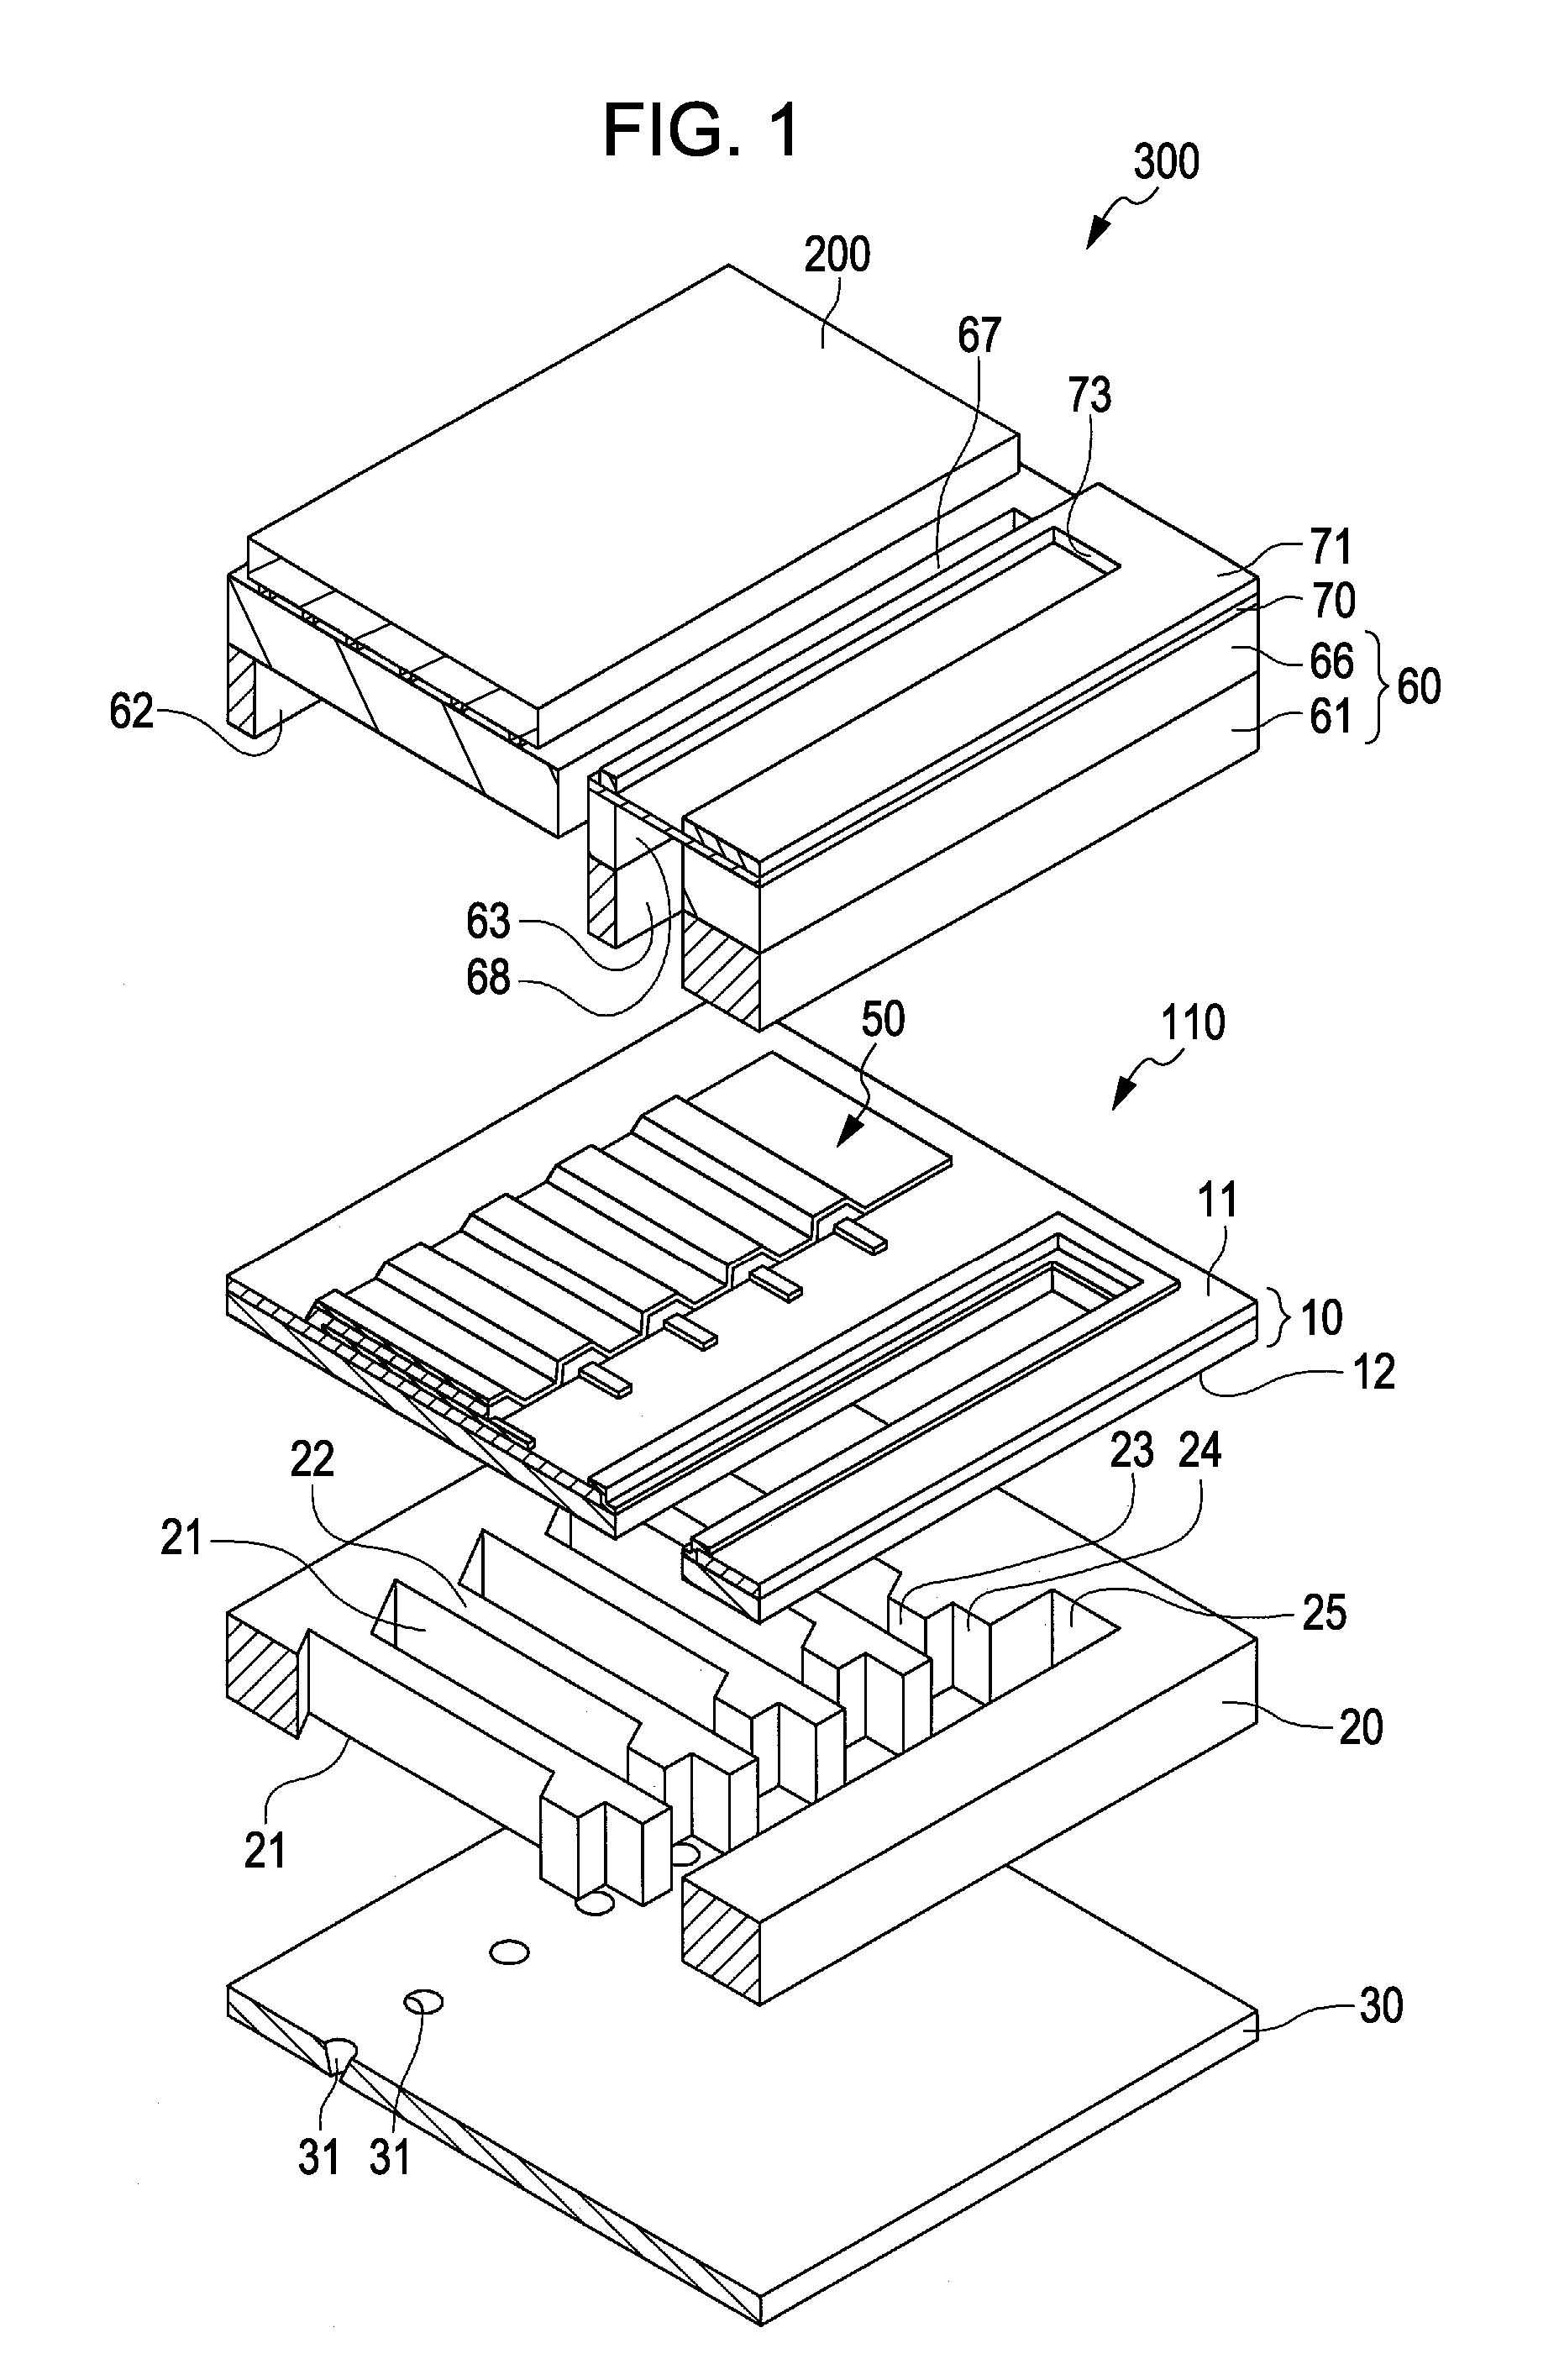 Liquid droplet ejecting head, method for manufacturing the same, and liquid droplet ejecting apparatus